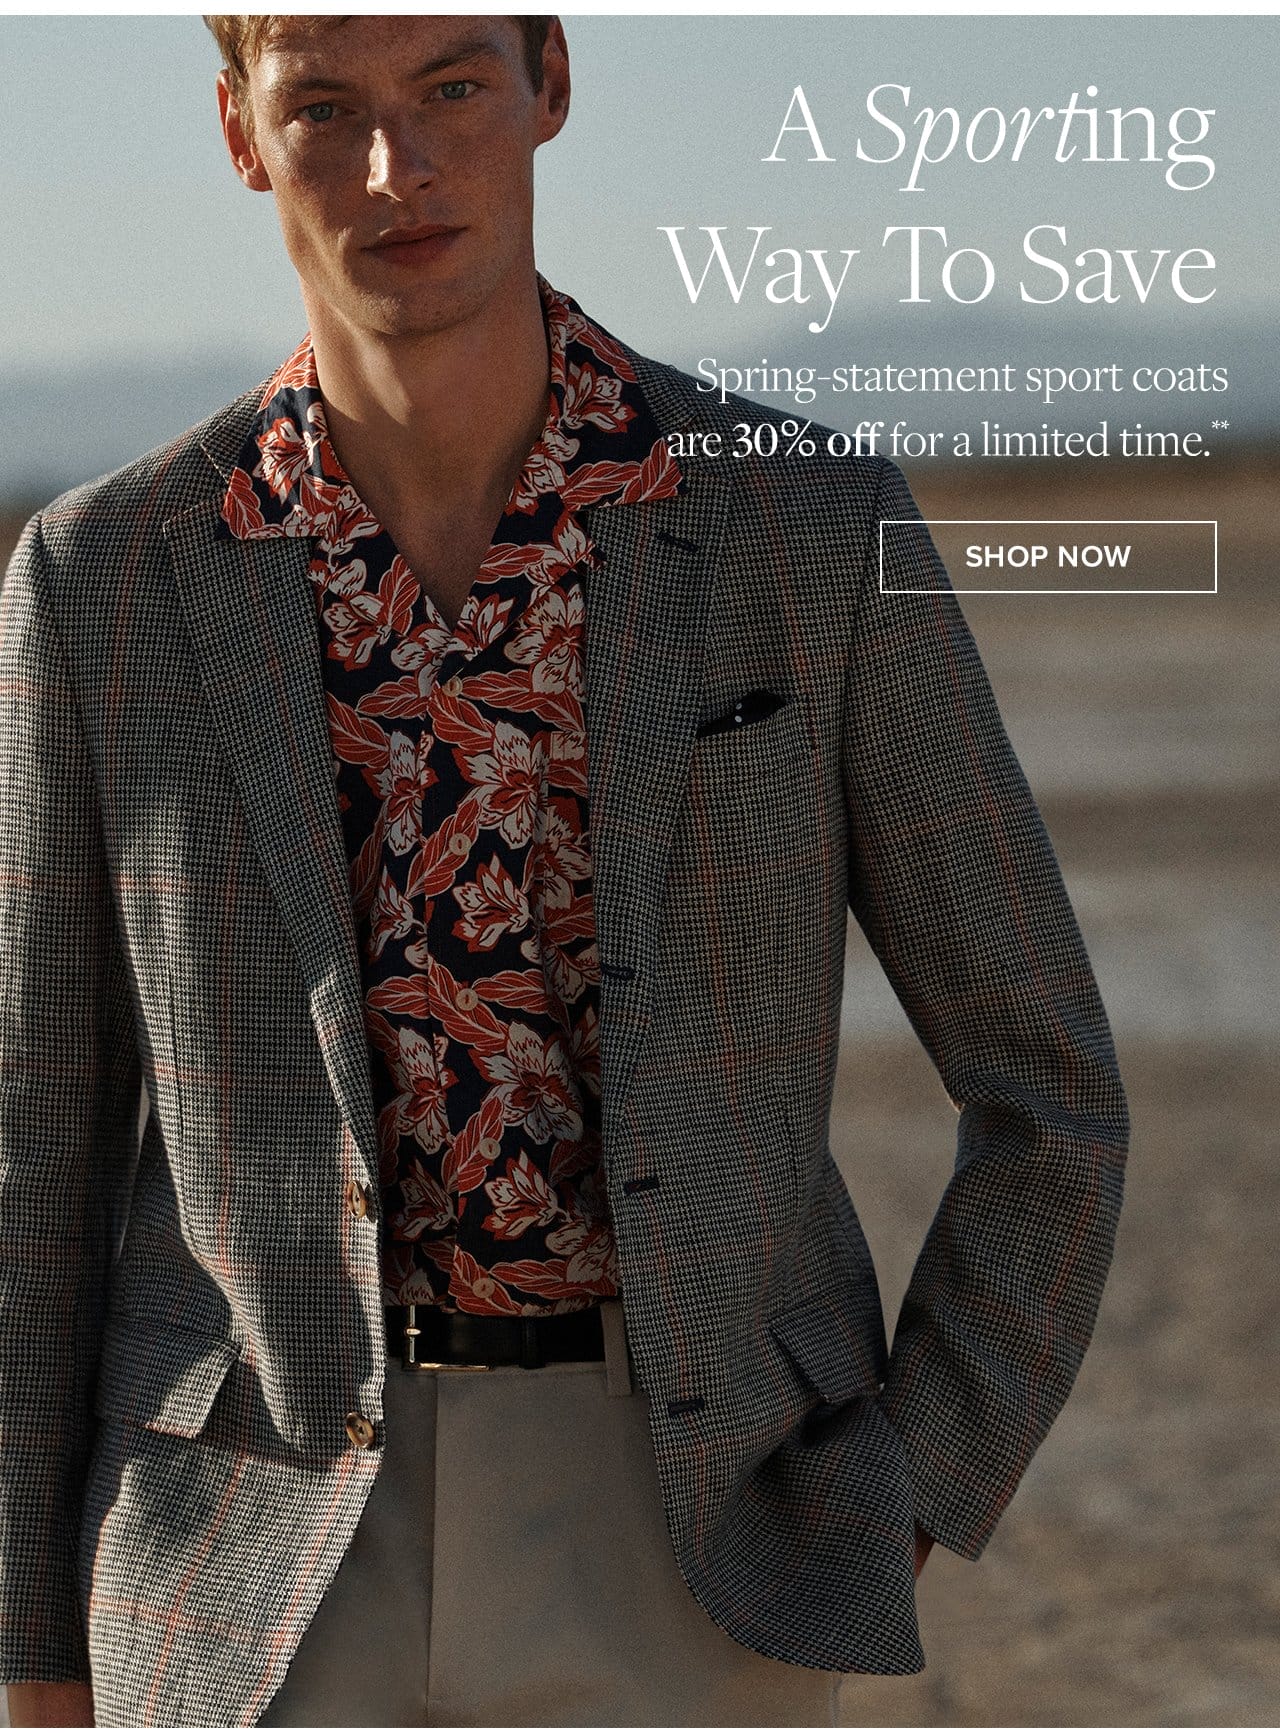 A Sporting Way To Save Spring-statement sport coats are 30% off for a limited time. Shop Now